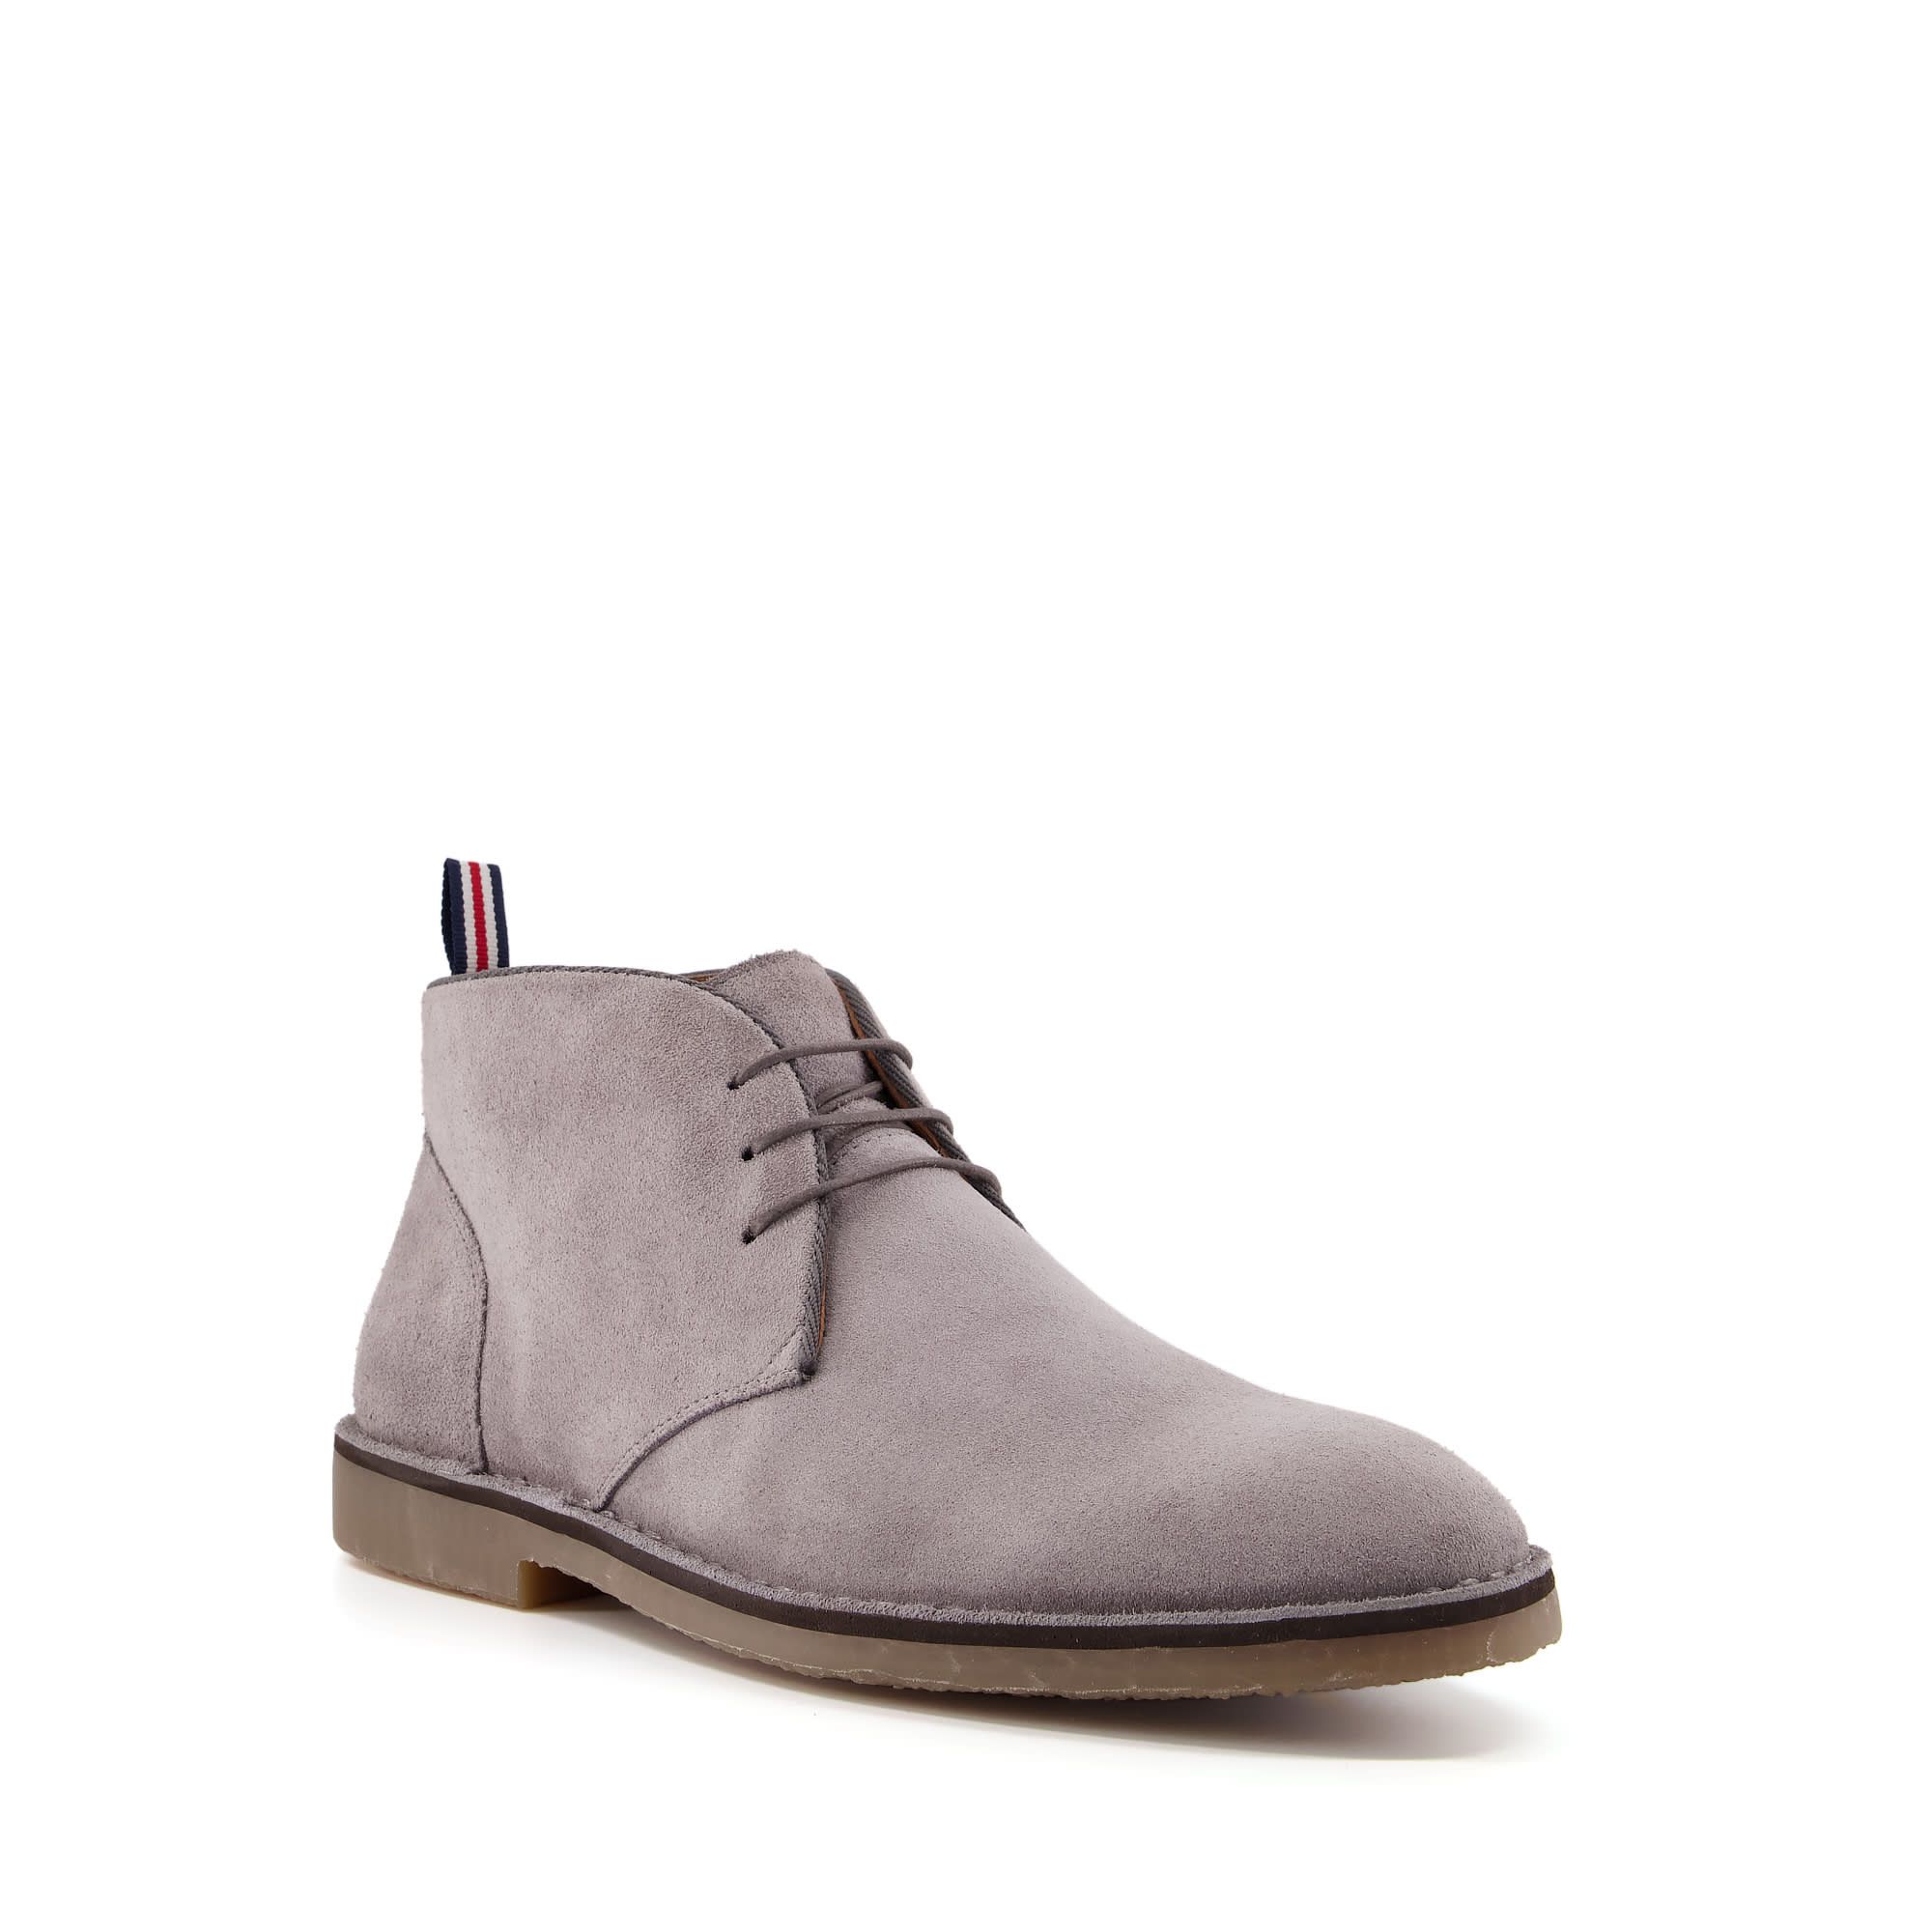 The perfect go-to for everyday casual styling. These versatile desert boots slip on easily thanks to the back pull tab feature. Fastened with lace ups and featuring a practical rubber sole.